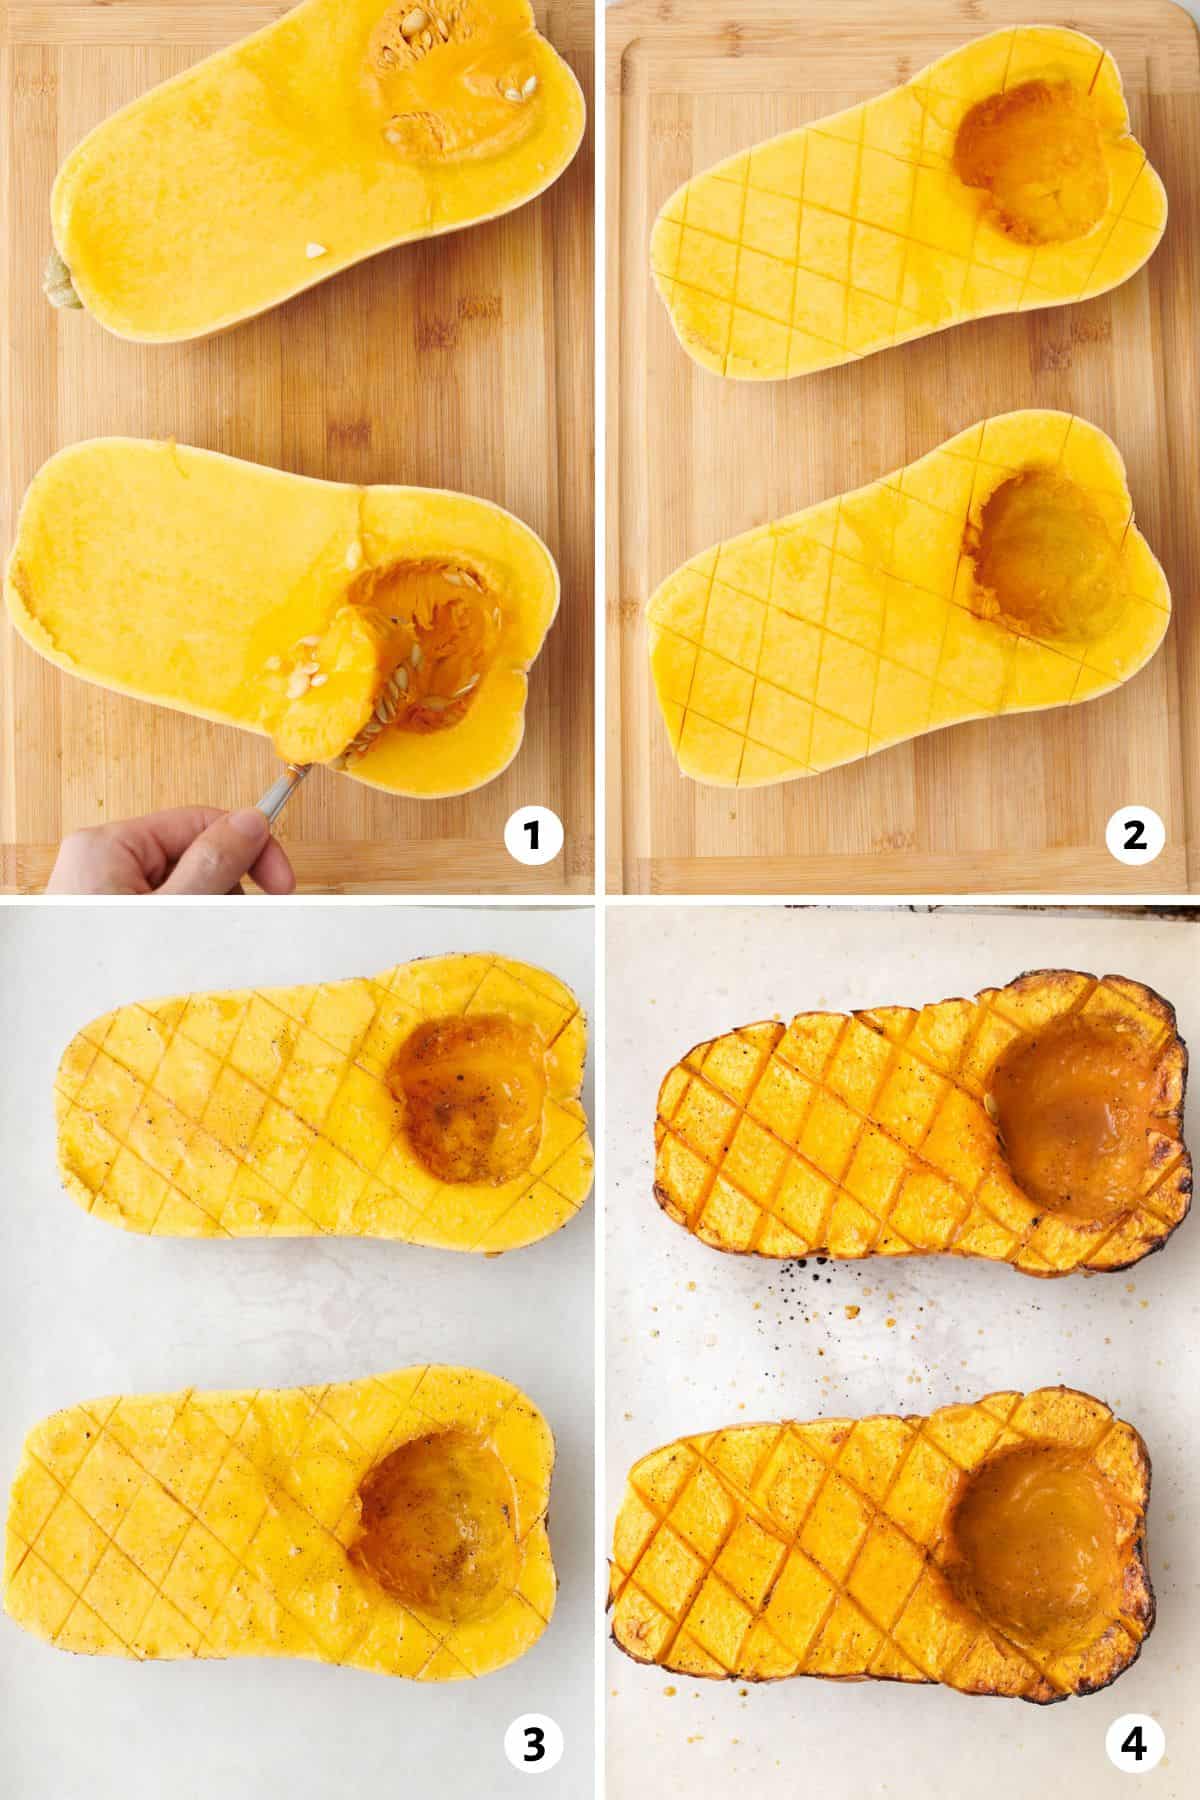 4 image collage showing steps on how to roast butternut squash: 1- 2 butternut squash halves on a cutting board with a spoon scooping out seeds, 2- after flesh is scored, 3- after coating with oil and seasoning, 4- after baking.